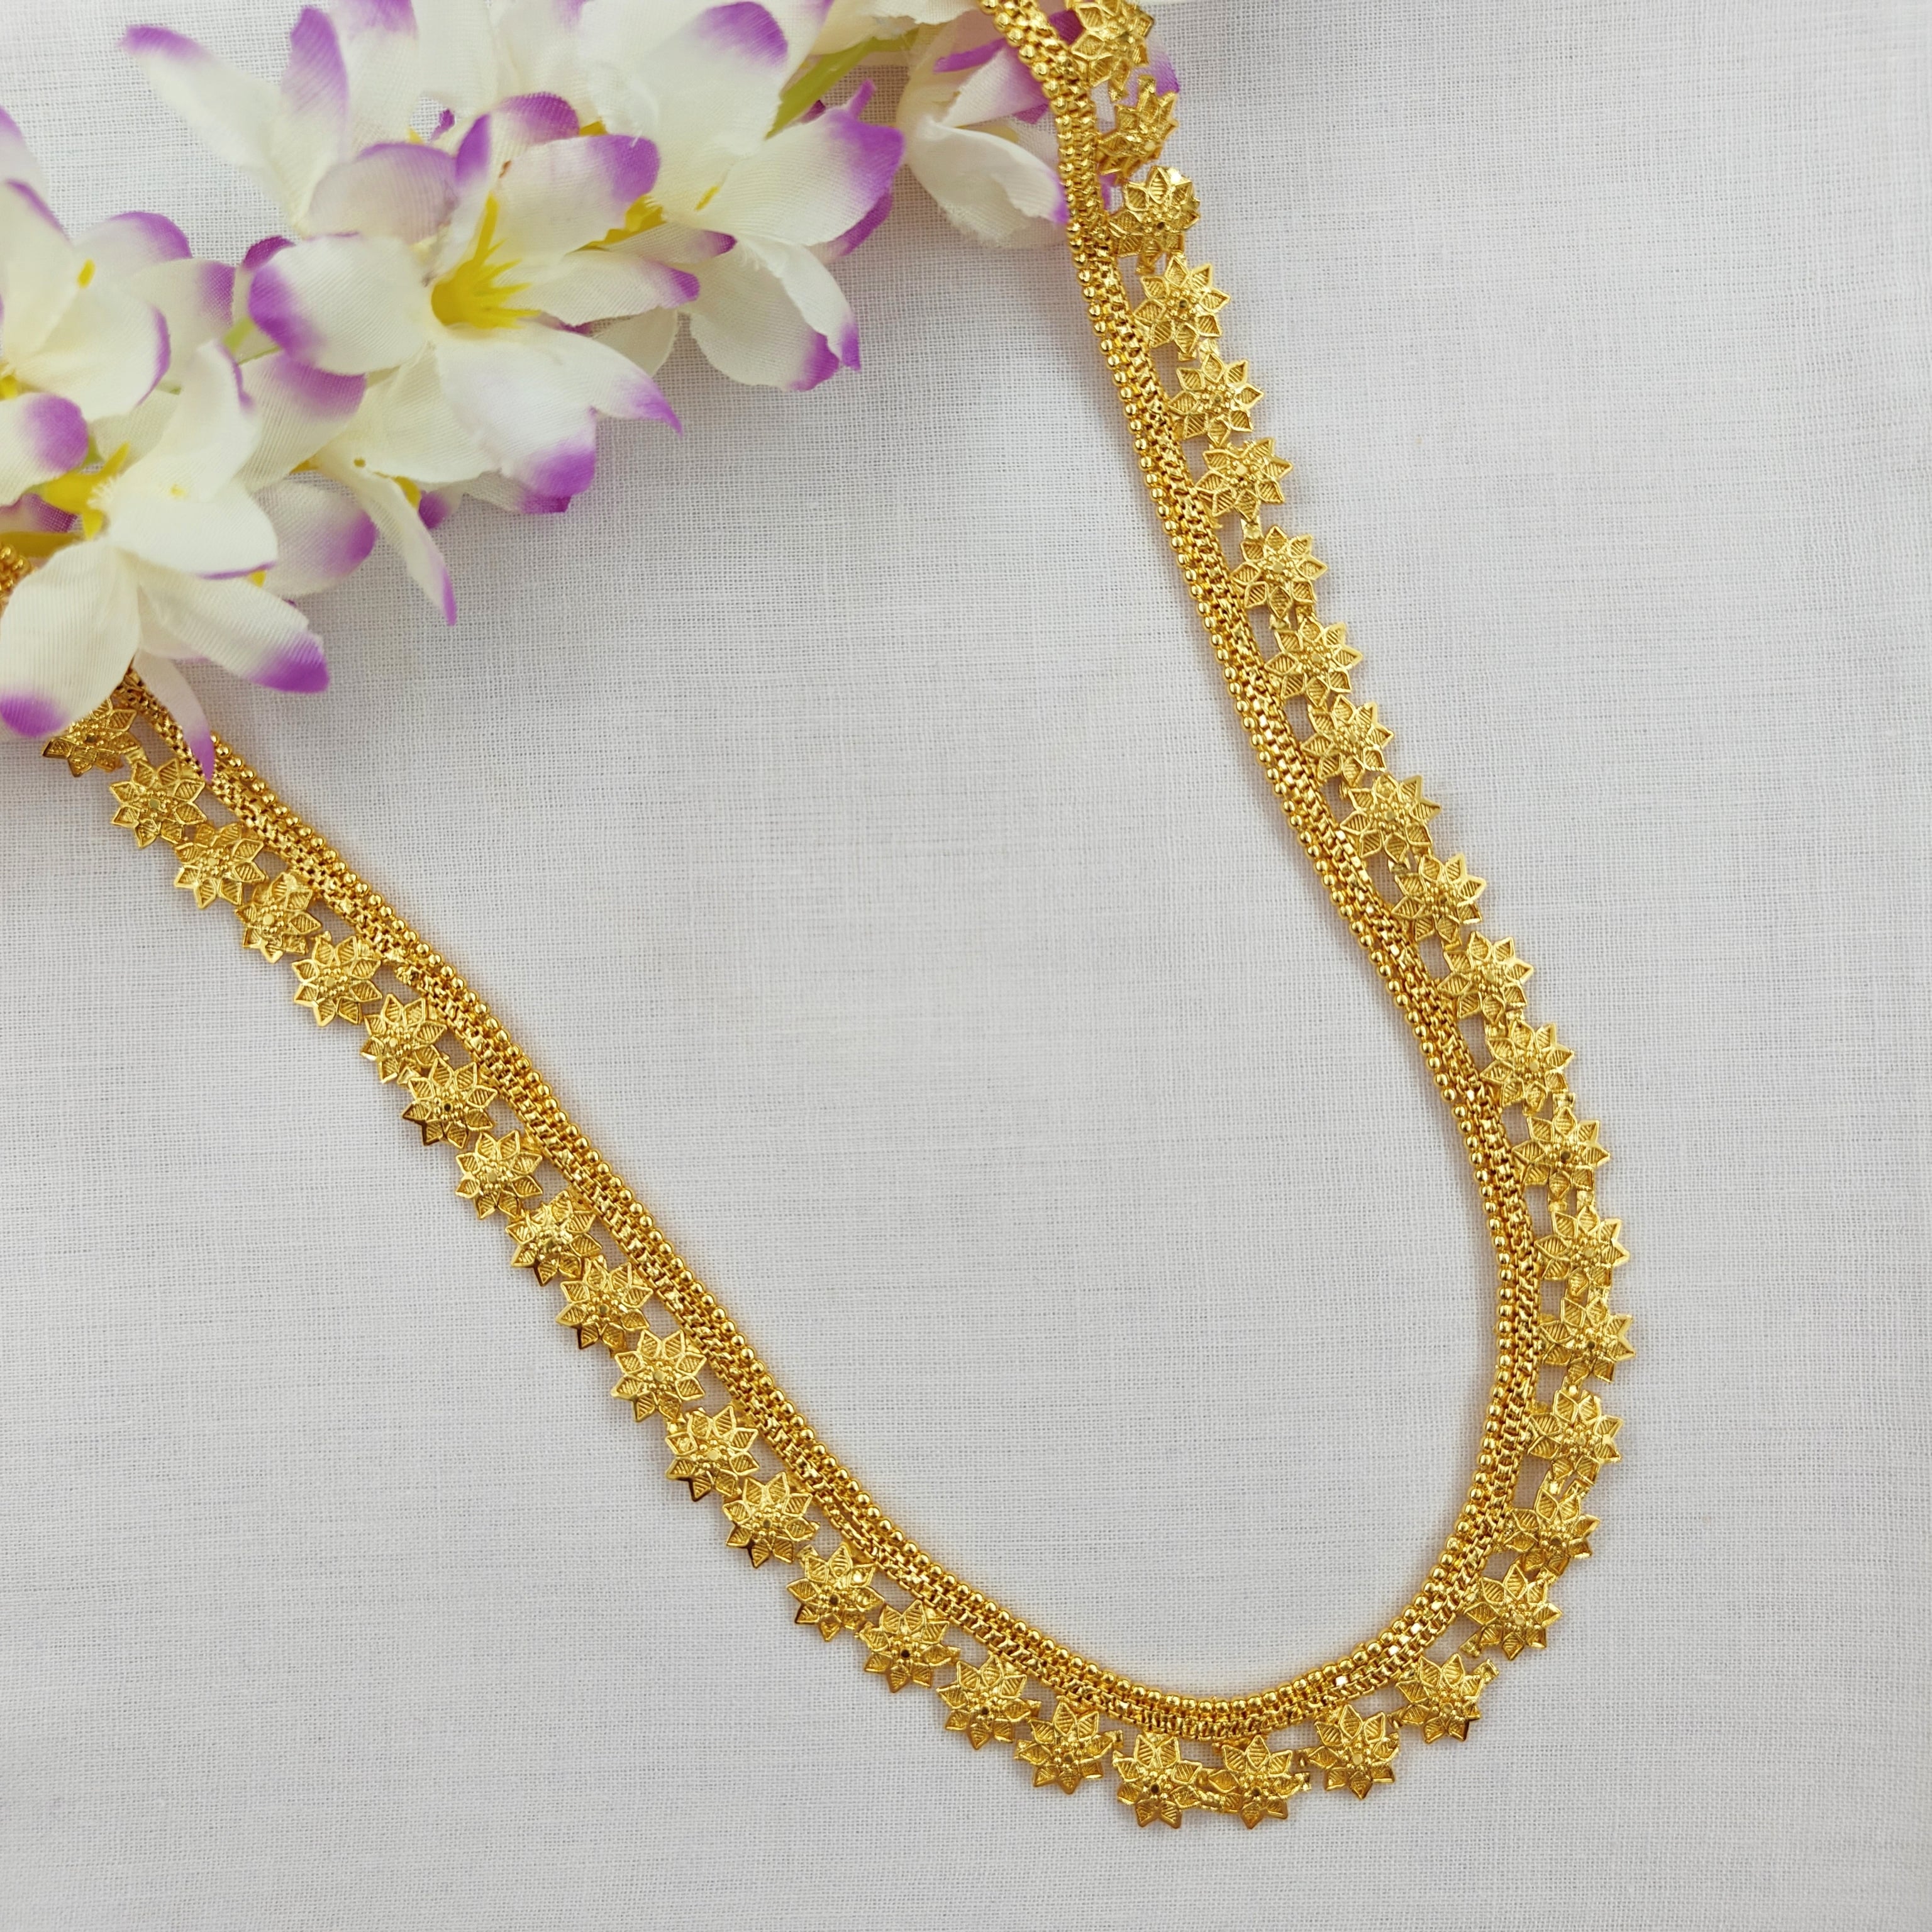 Floral Gold Necklace - Indian Jewellery Designs